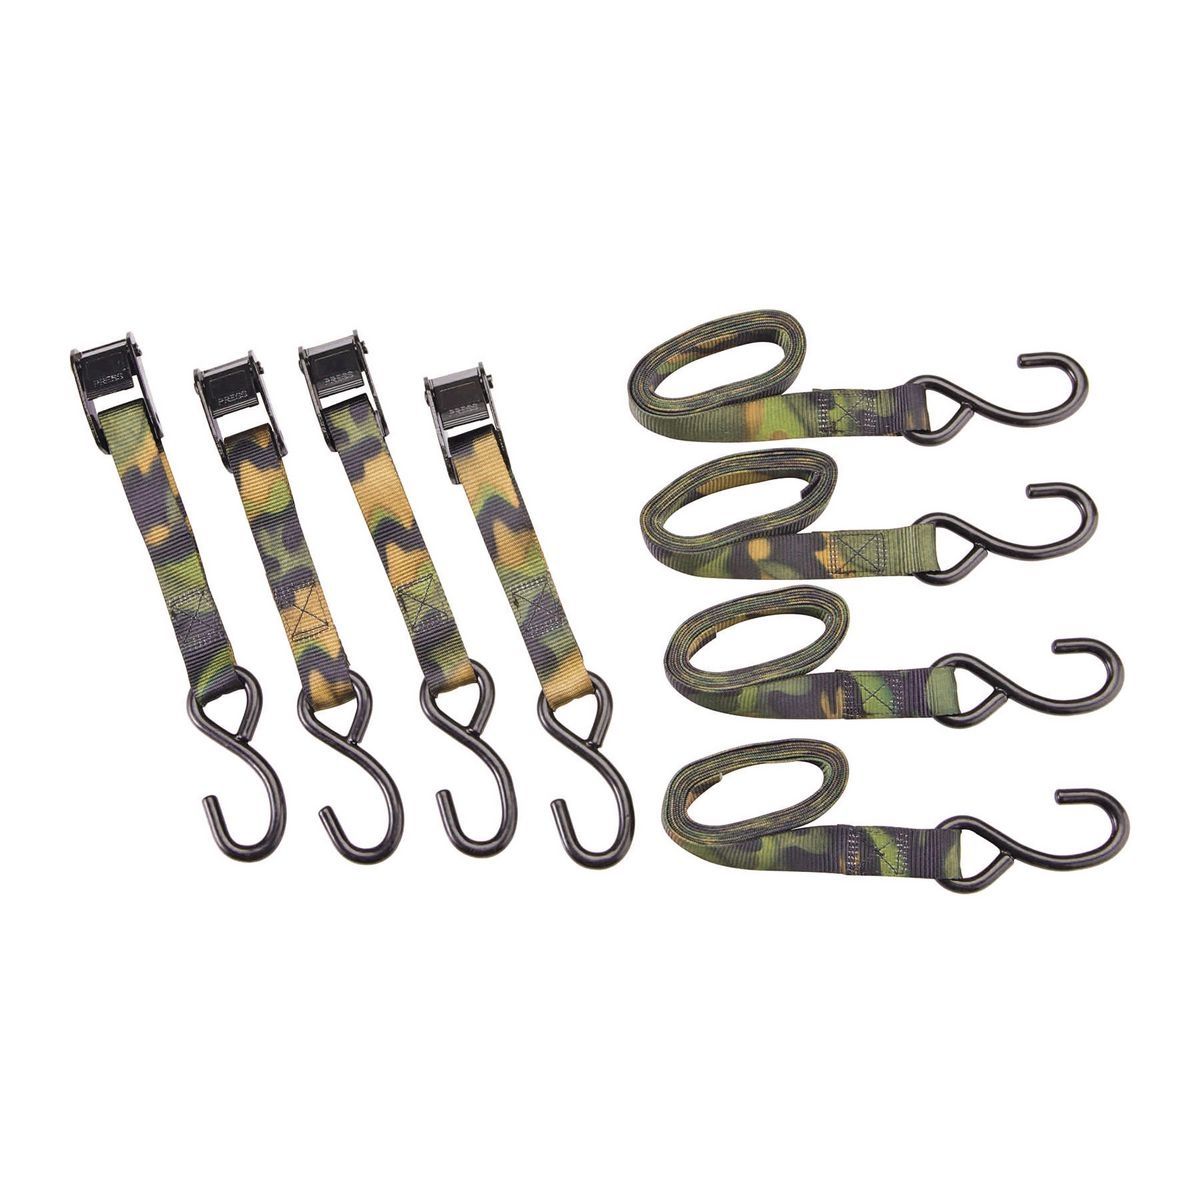 HAUL-MASTER 400 lb. Capacity 6 ft. x 1 in. Camouflage Cam Buckle Tie Downs, 4 Pack